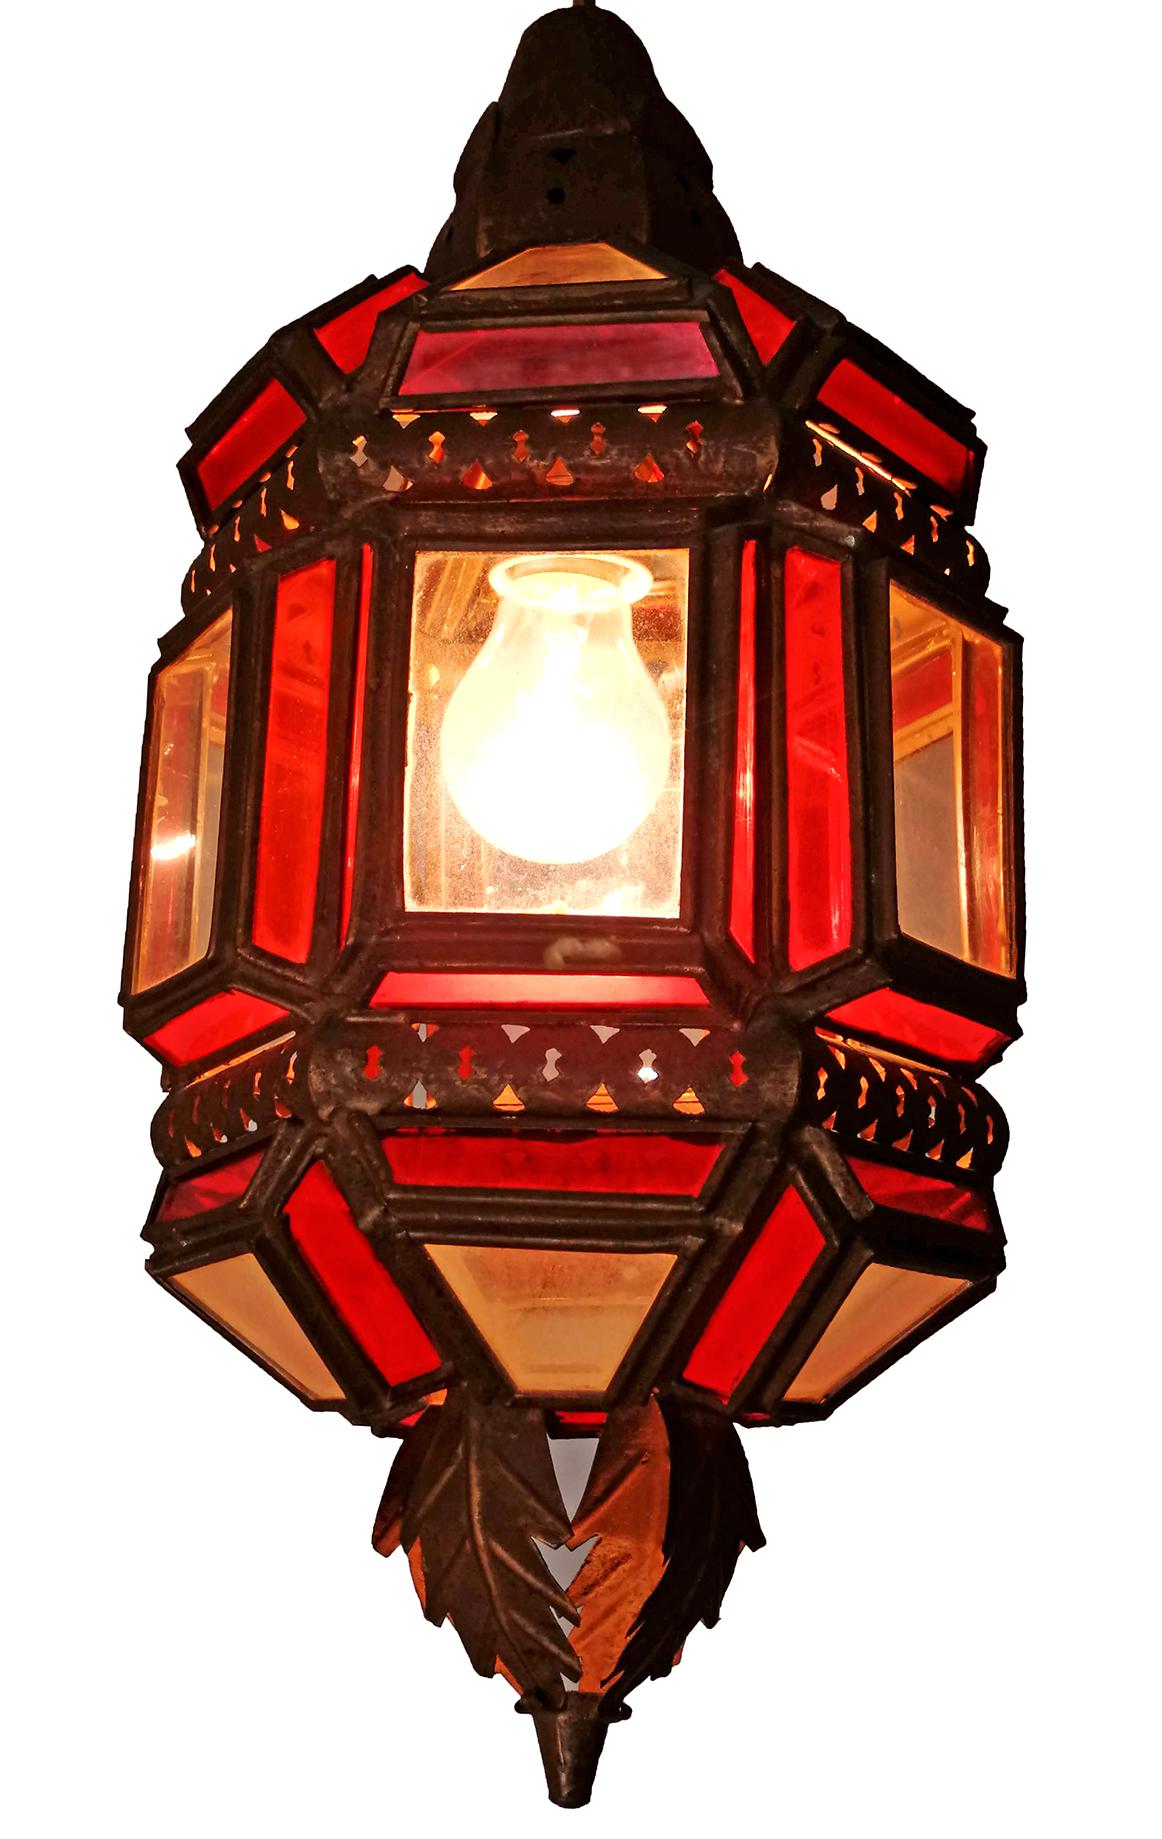 Hand-Crafted Moroccan Moorish Handmade Metal Ceiling Pendant Lantern in Red and White Glass